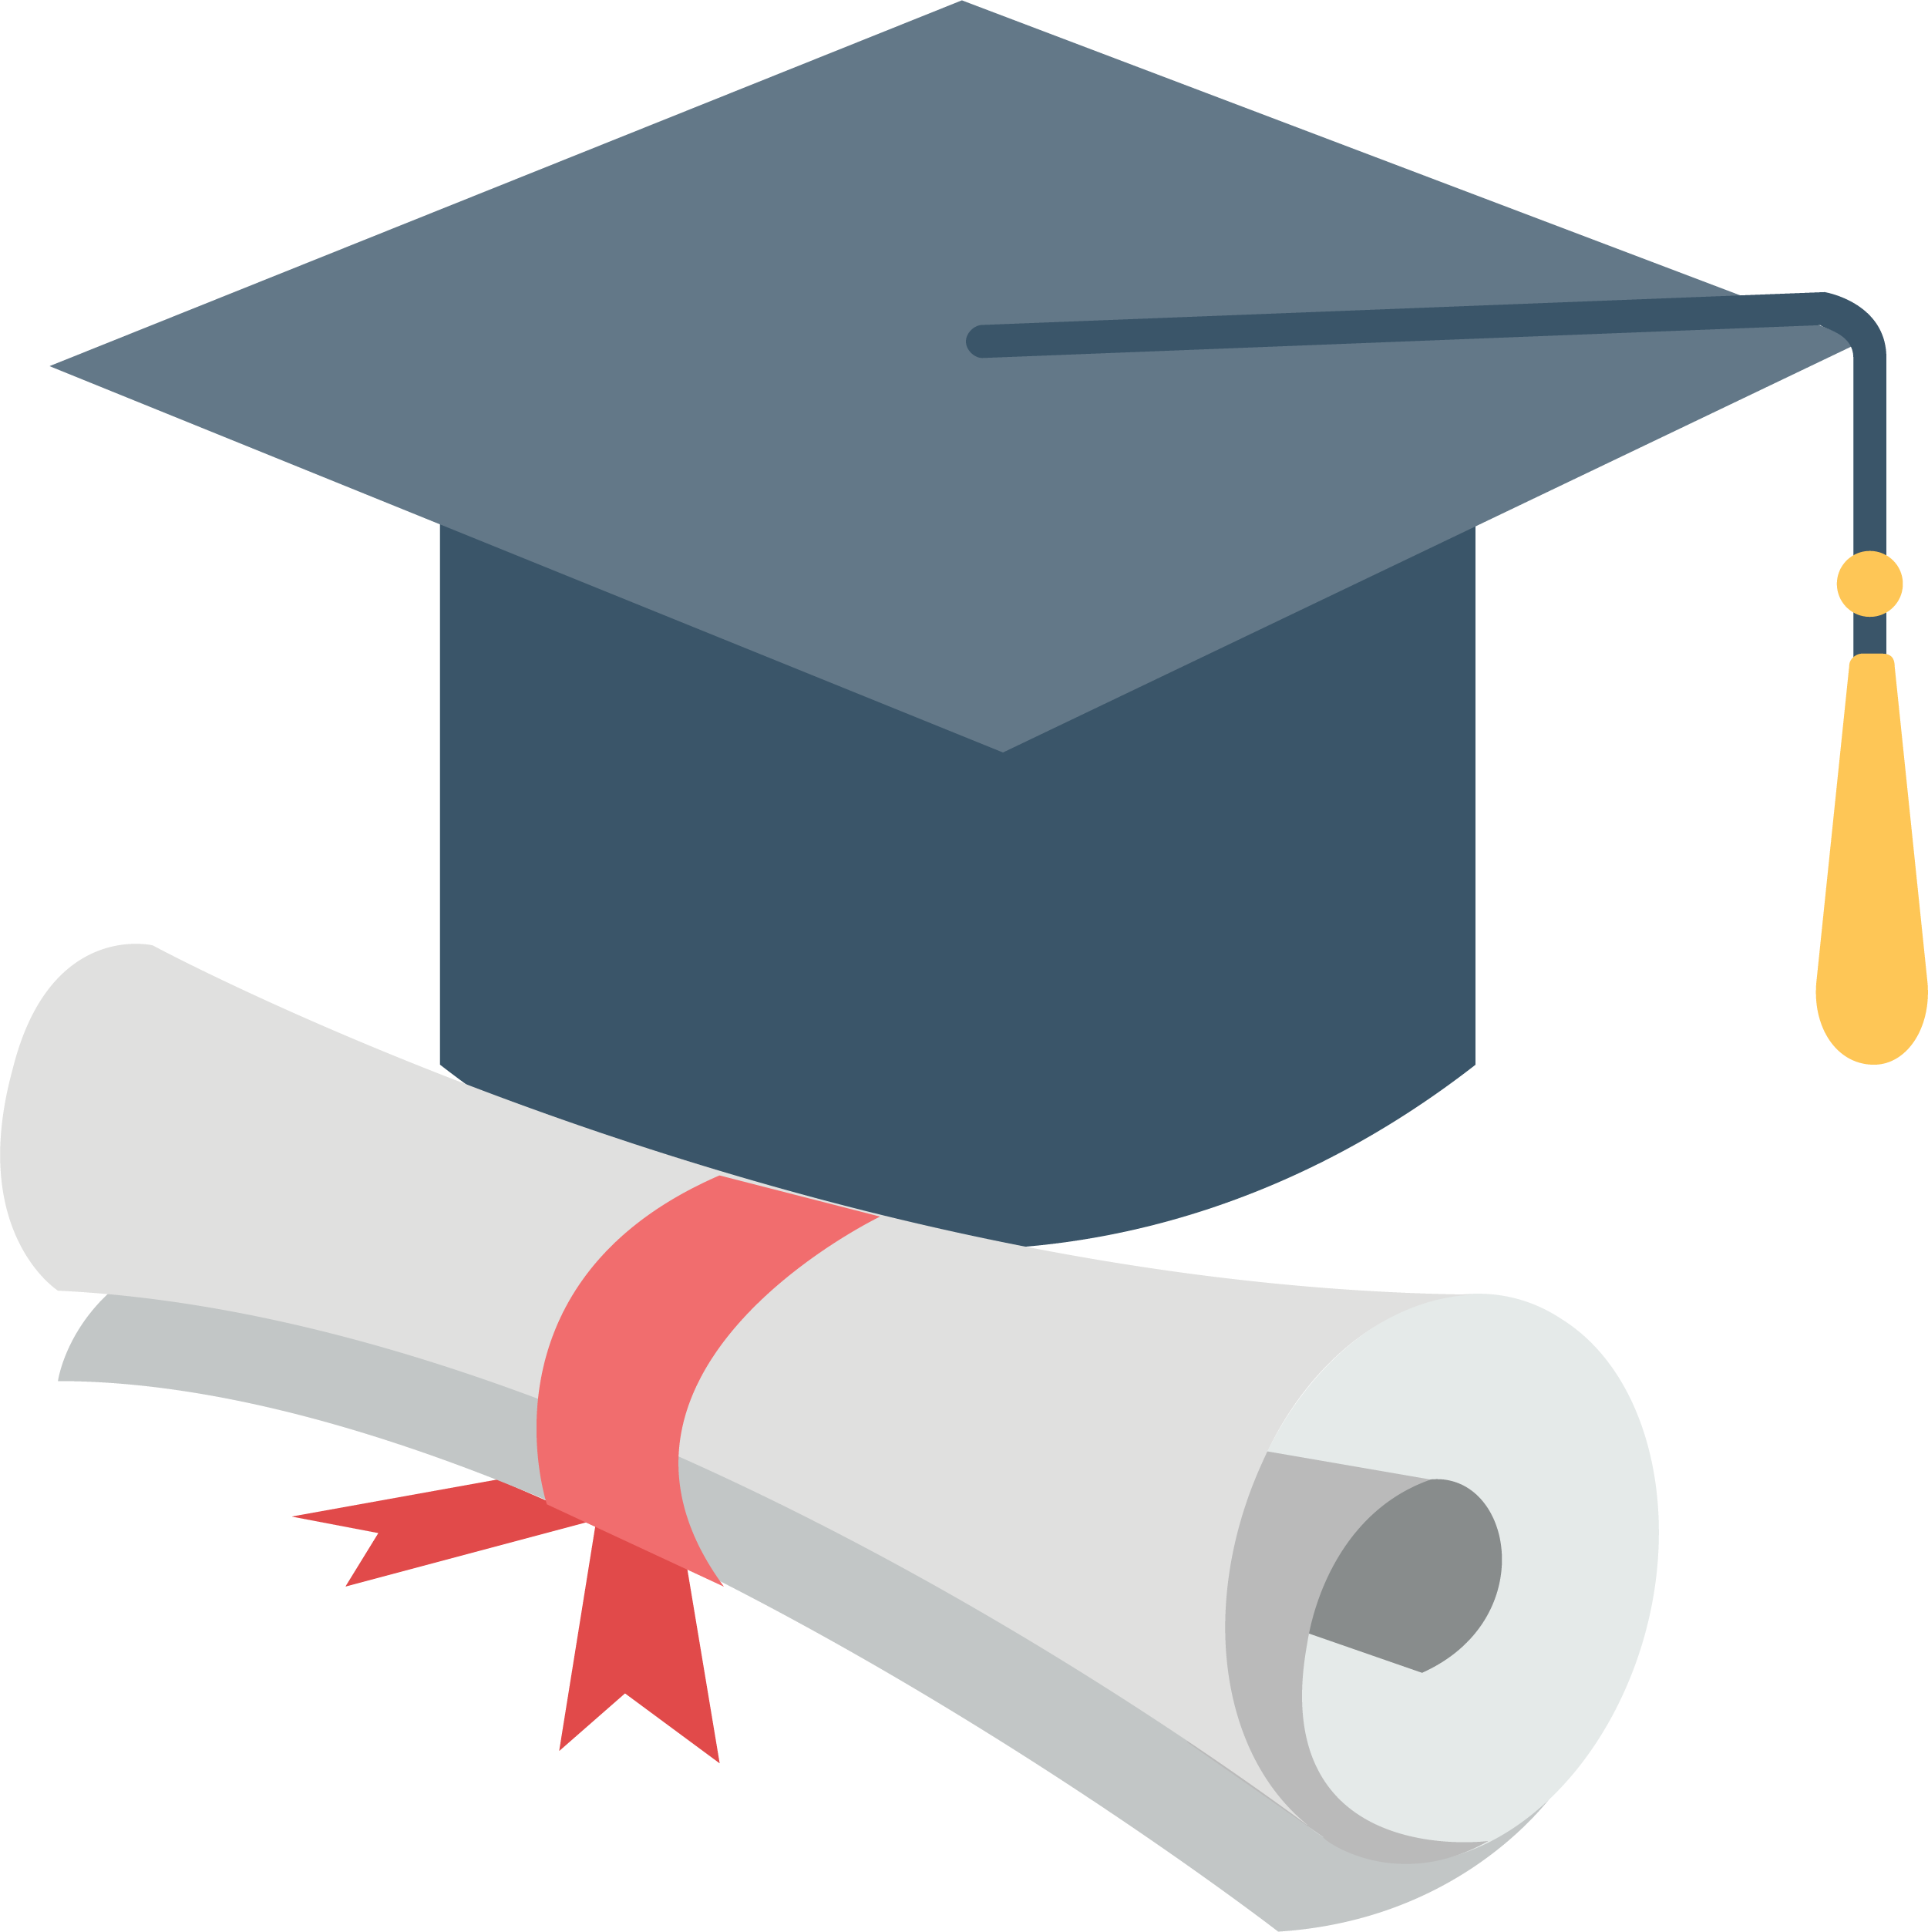 Ceremony And Certificate Degree Cap Graduation Bachelor PNG Image